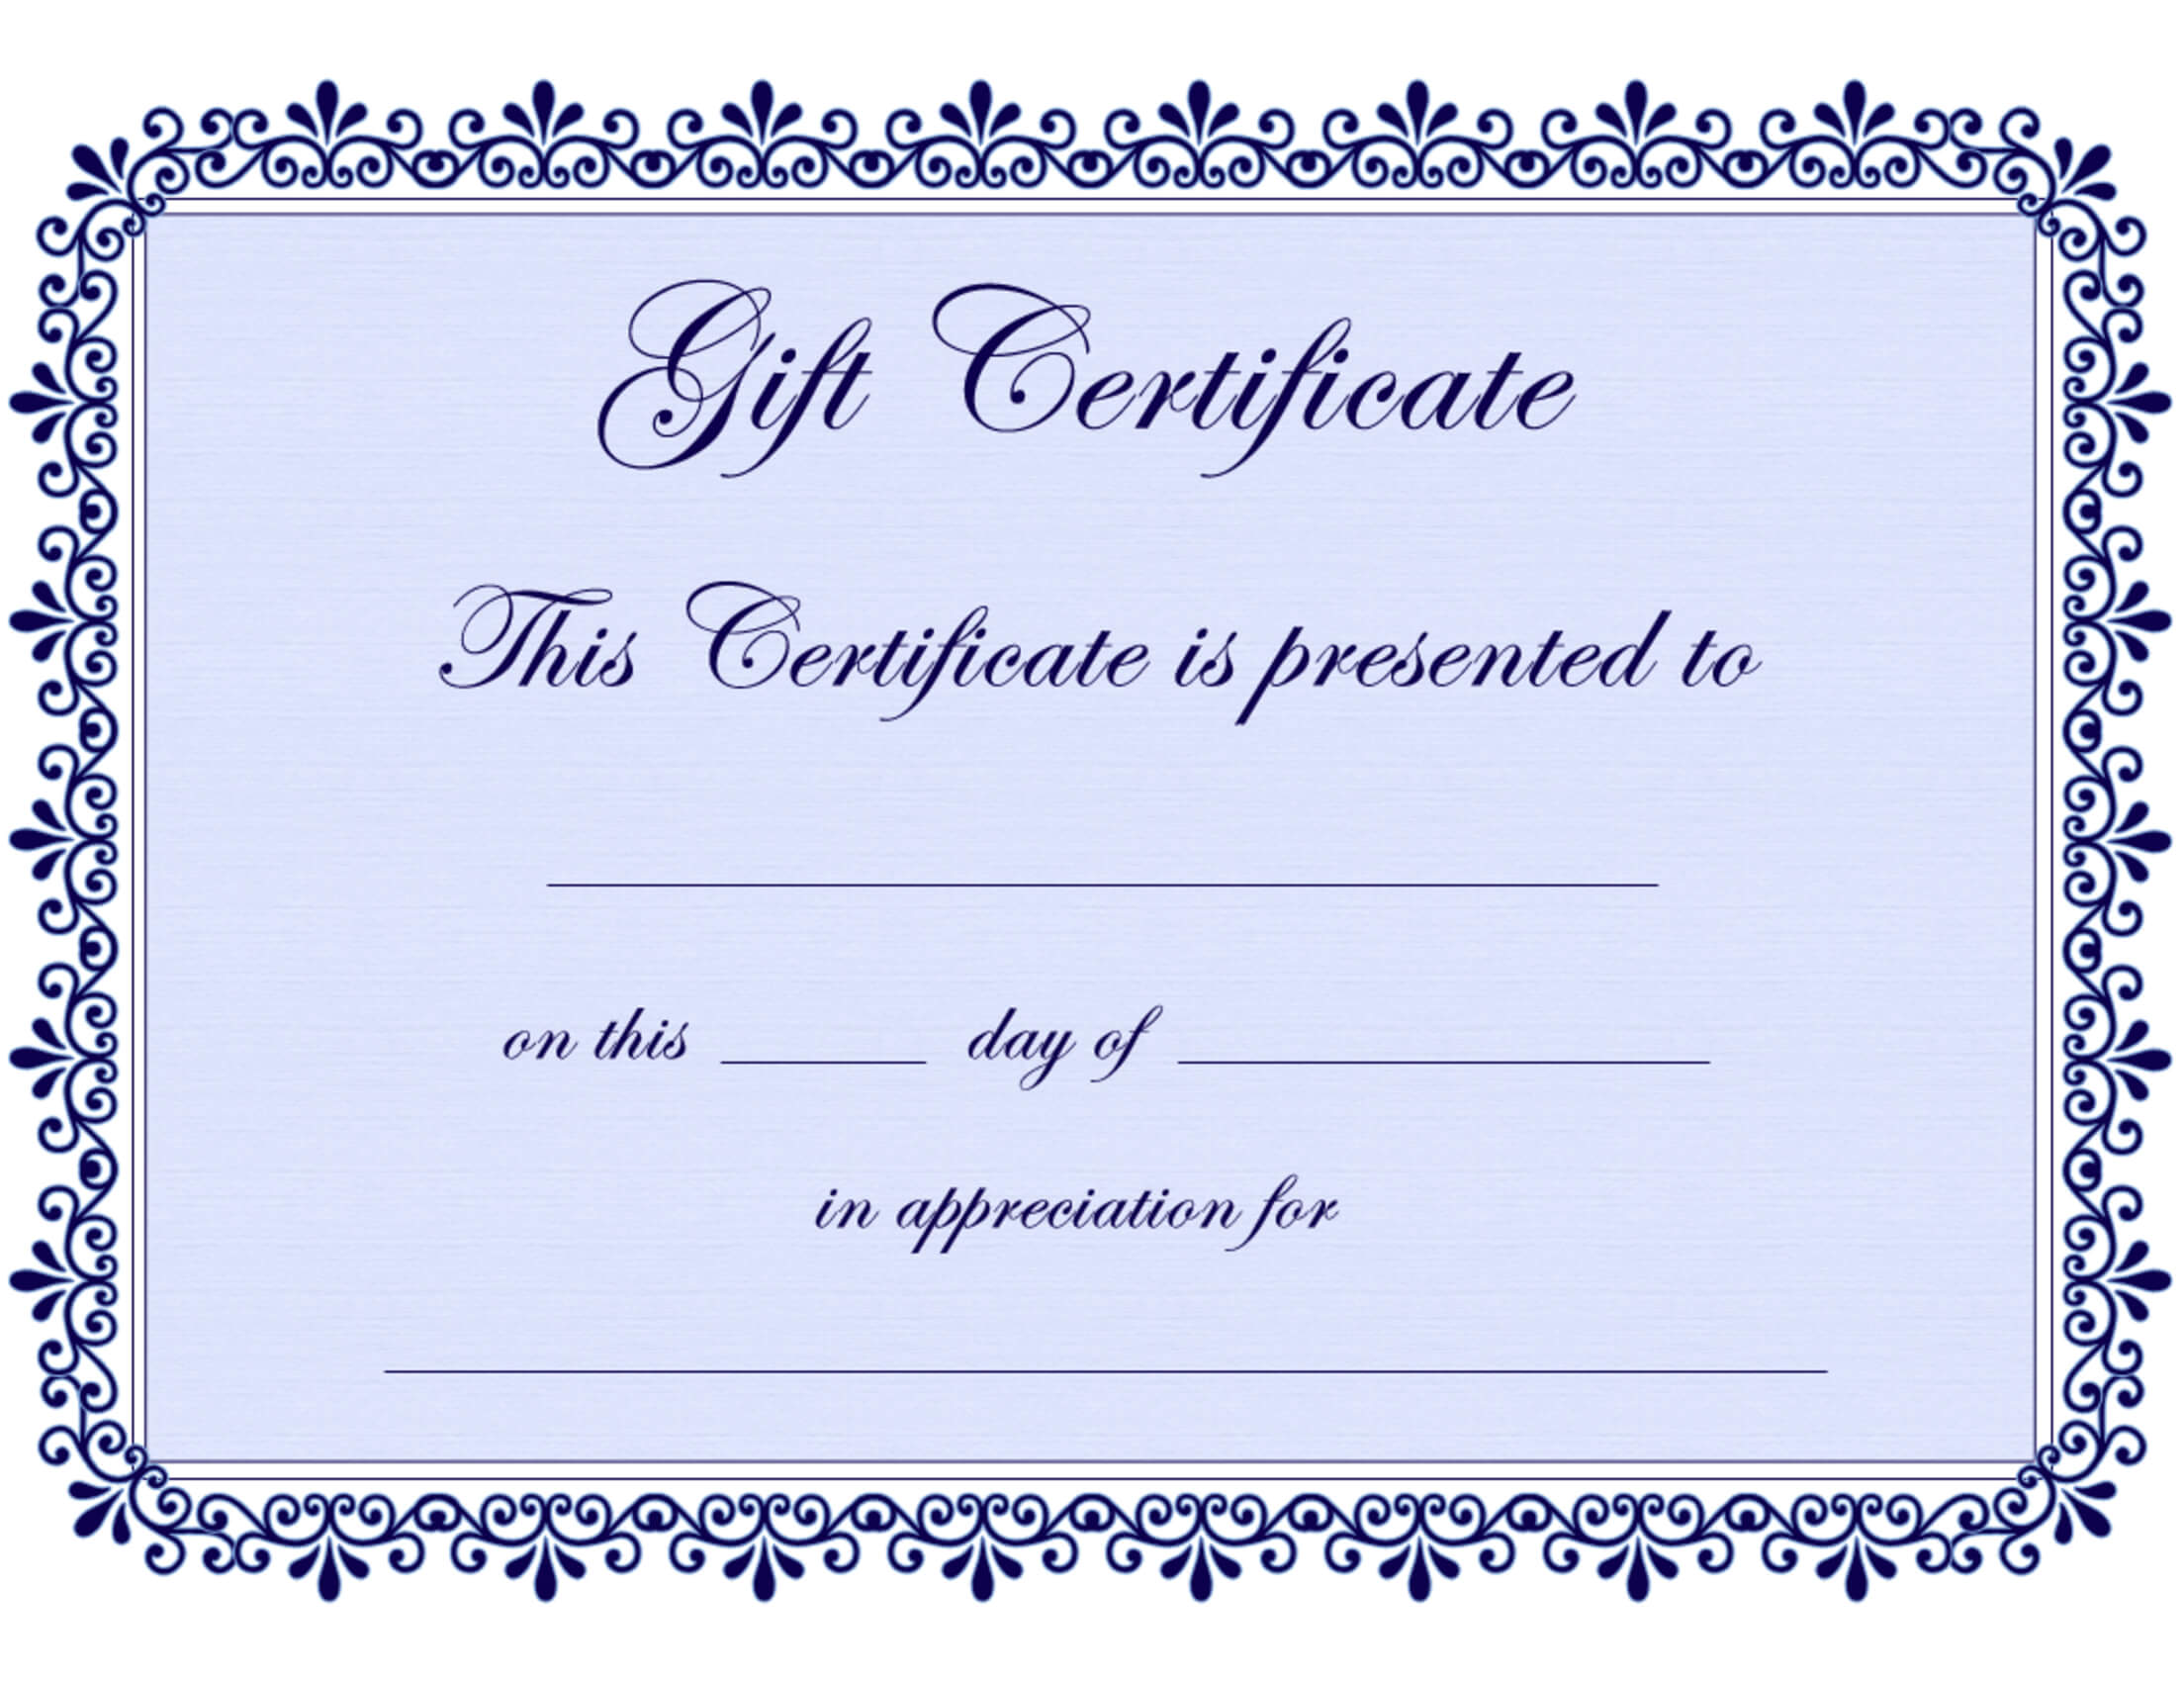 Certificate Templates | Gift Certificate Template Free – Pdf Intended For Present Certificate Templates